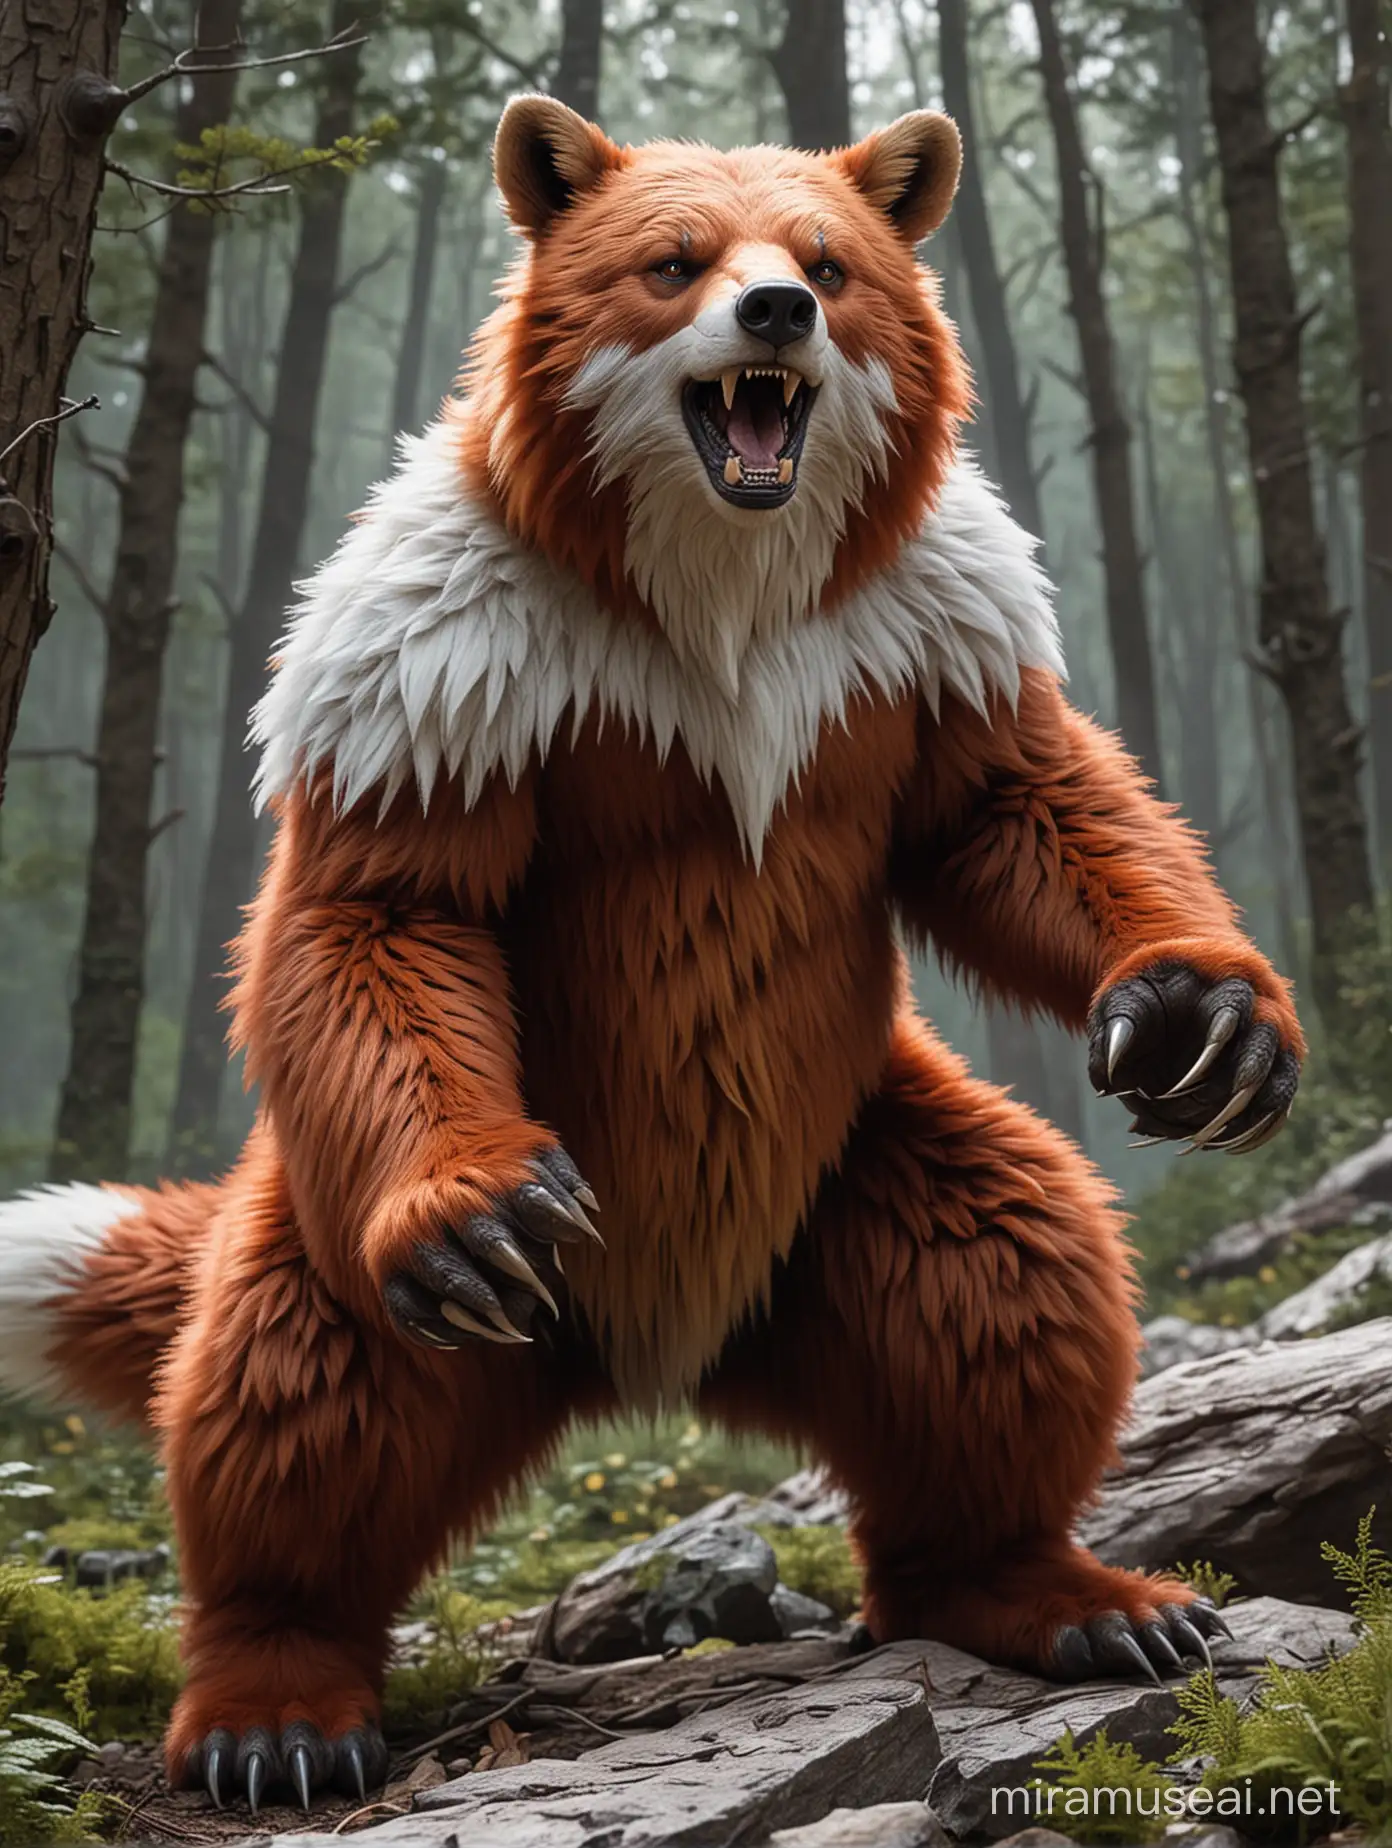 Create a realistic bear from dungeons and dragons, angry and in an attacking position. Its fox red fur with white details. He will be in a forest.